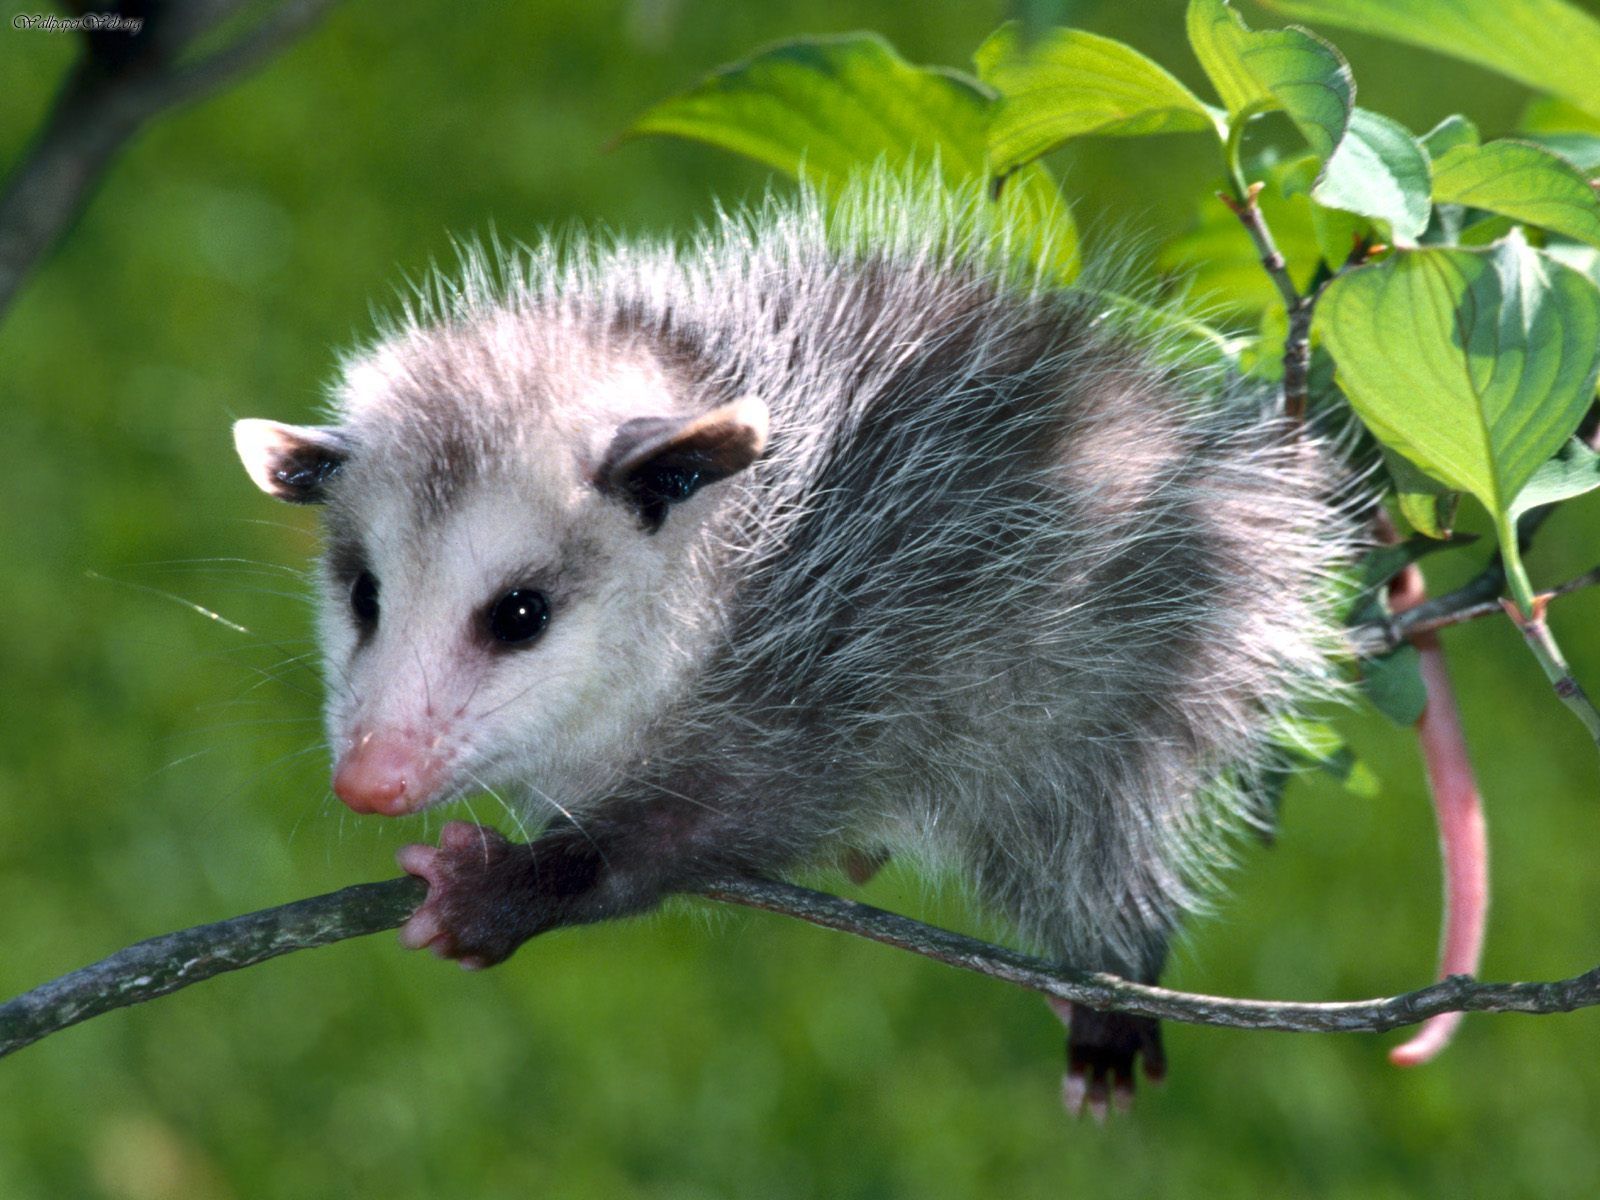 A young Virgina Opossum on a very small branch